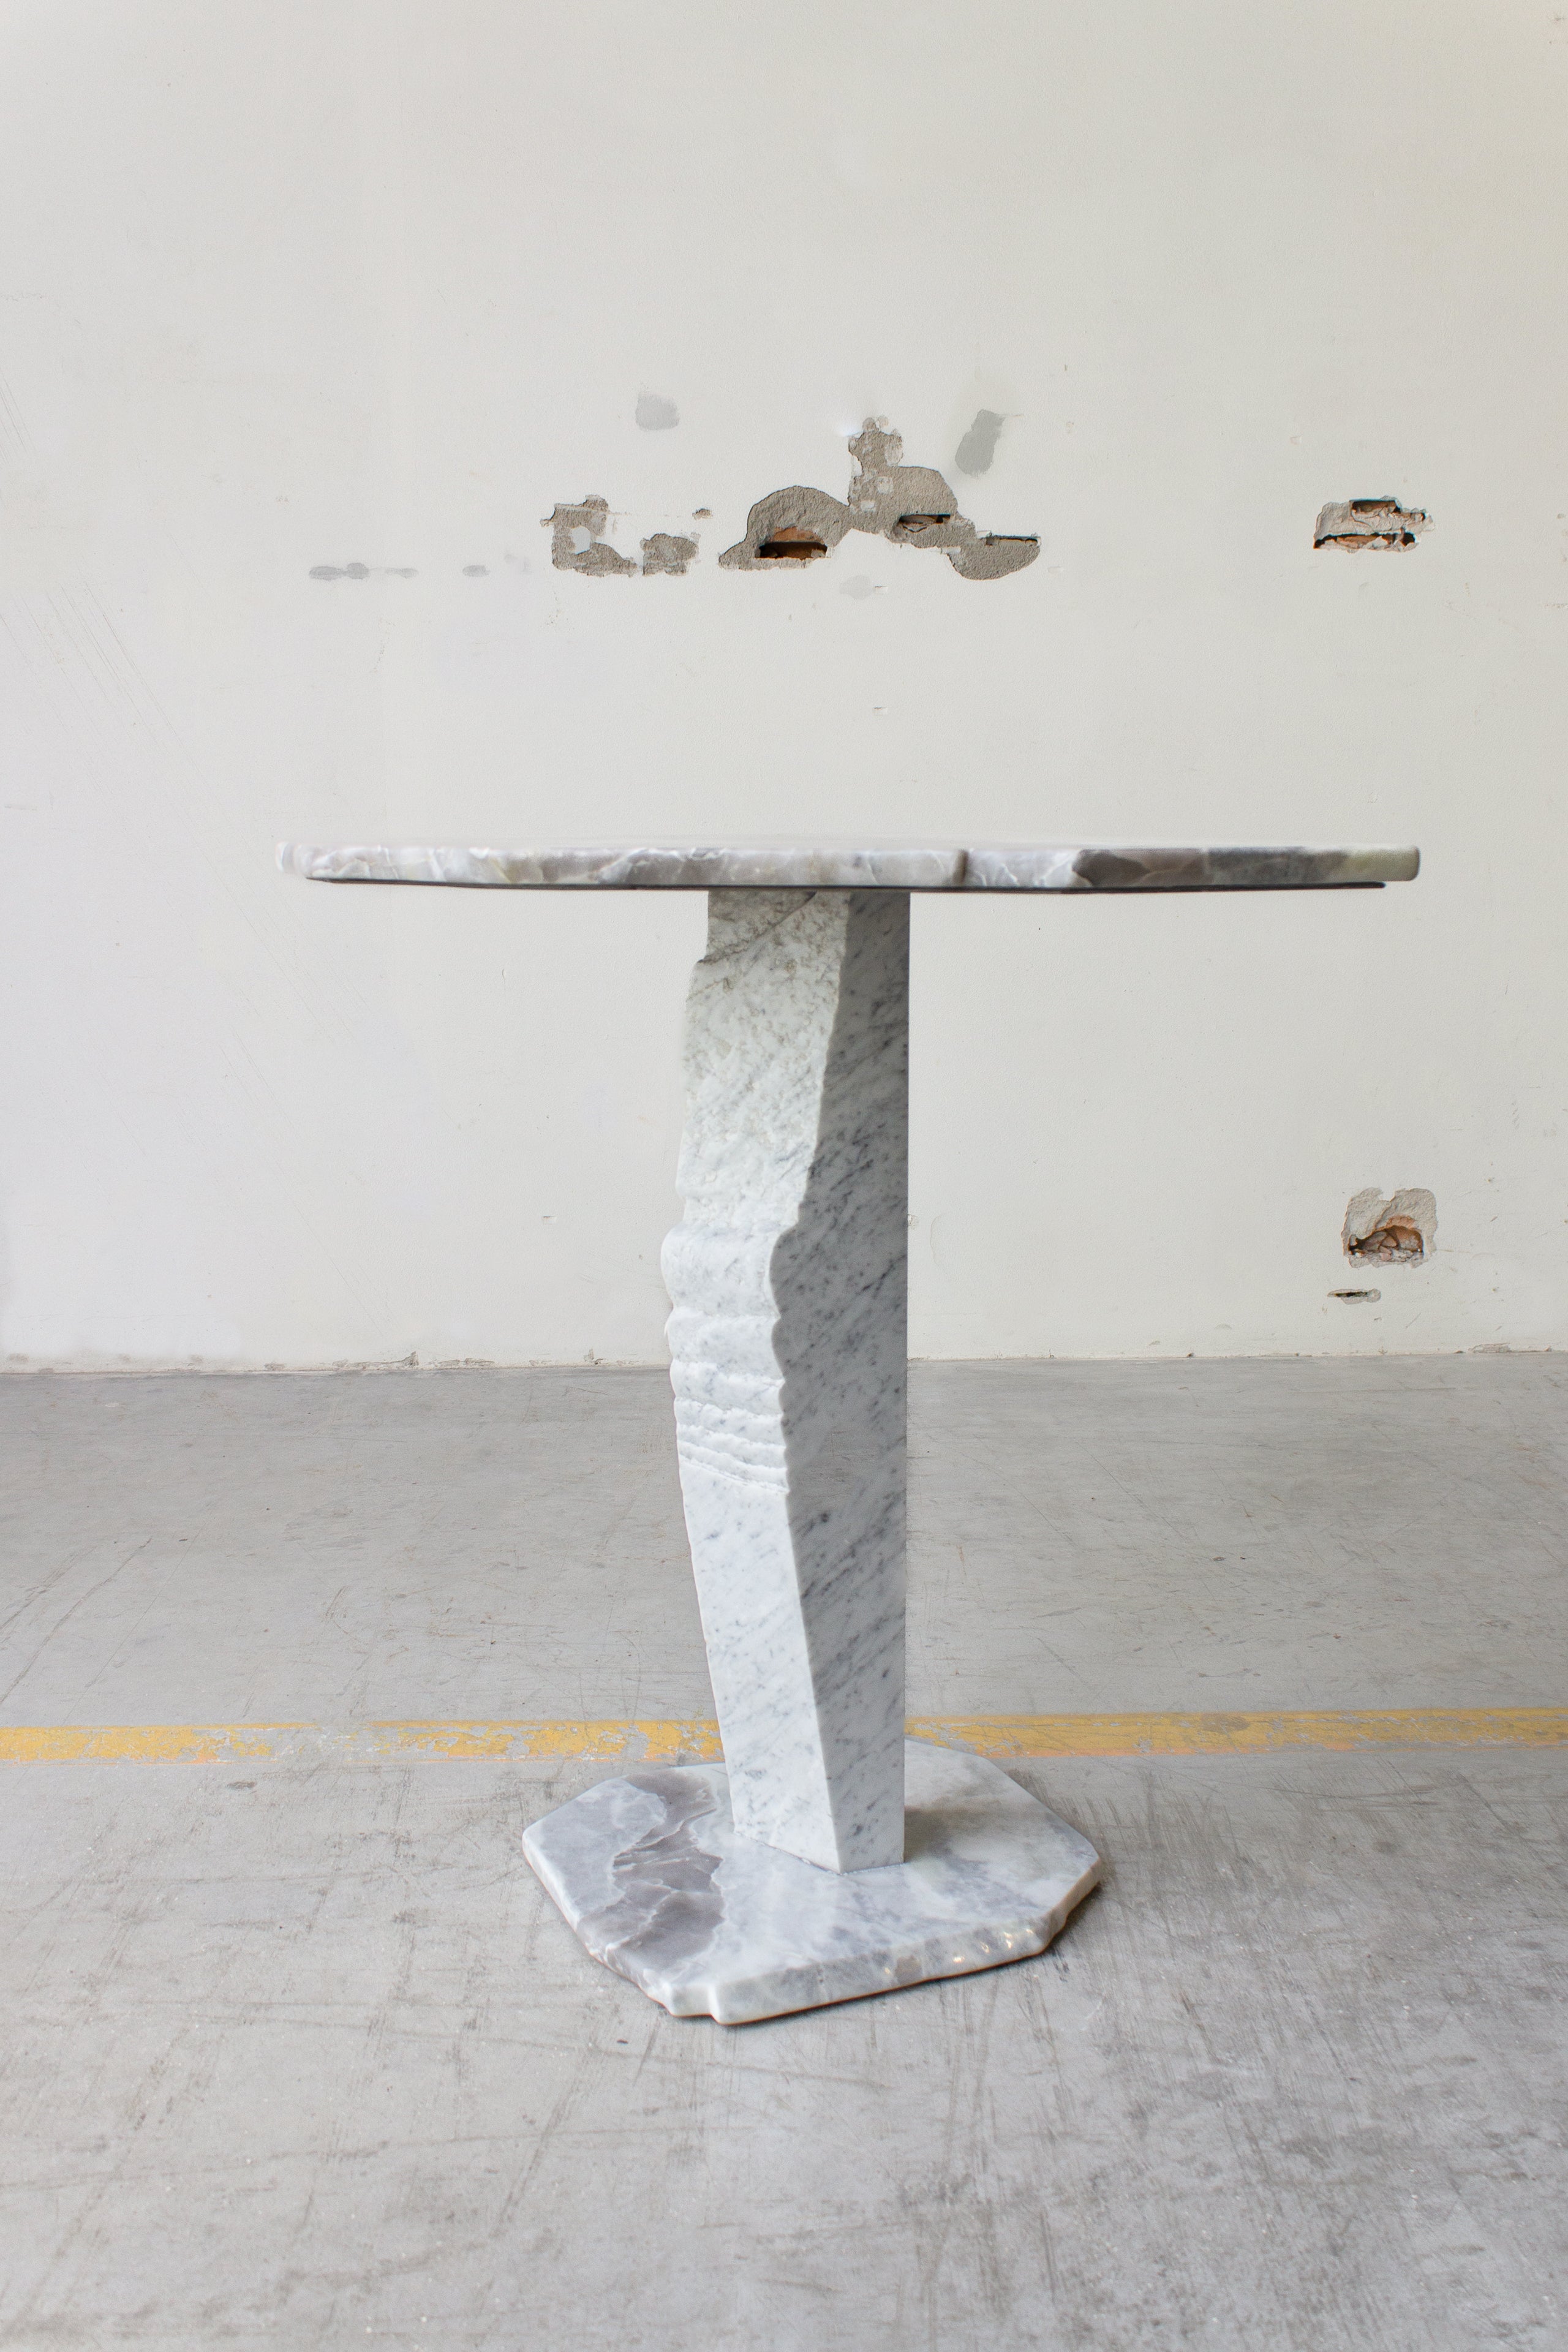 SST021 side table by Stone Stackers
Dimensions: D 56.5 x W 55 x H 69.5 cm
Materials: Carrara marble, Dover White marble.
Marble Structure: Carrara
Marble Base: Dover White
Weight: 35 kg

This side table features two main Dover White marble slabs